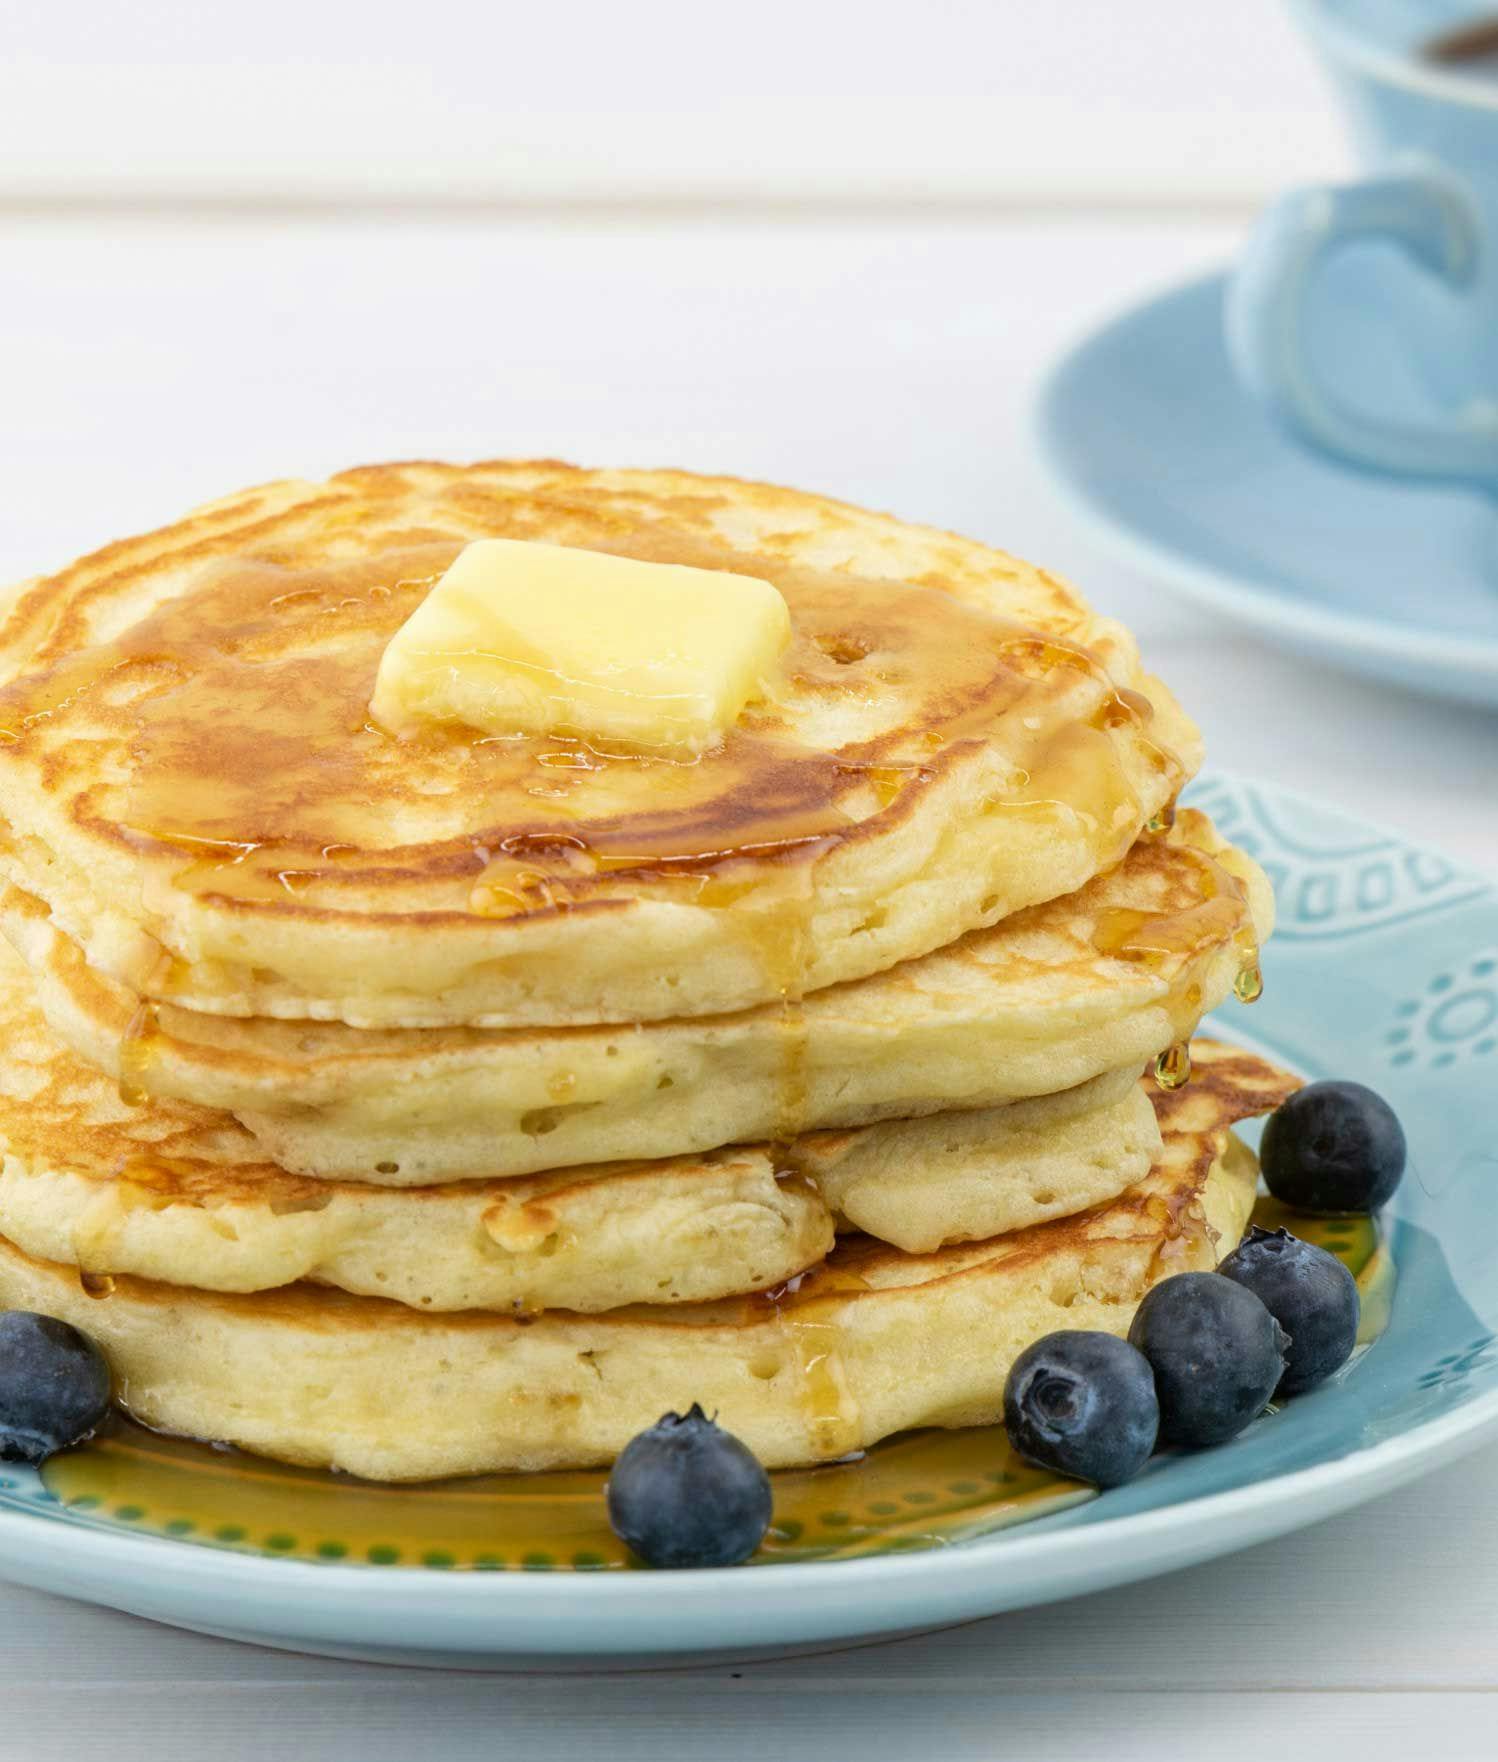 A stack of buttermilk pancakes with butter and blueberries.